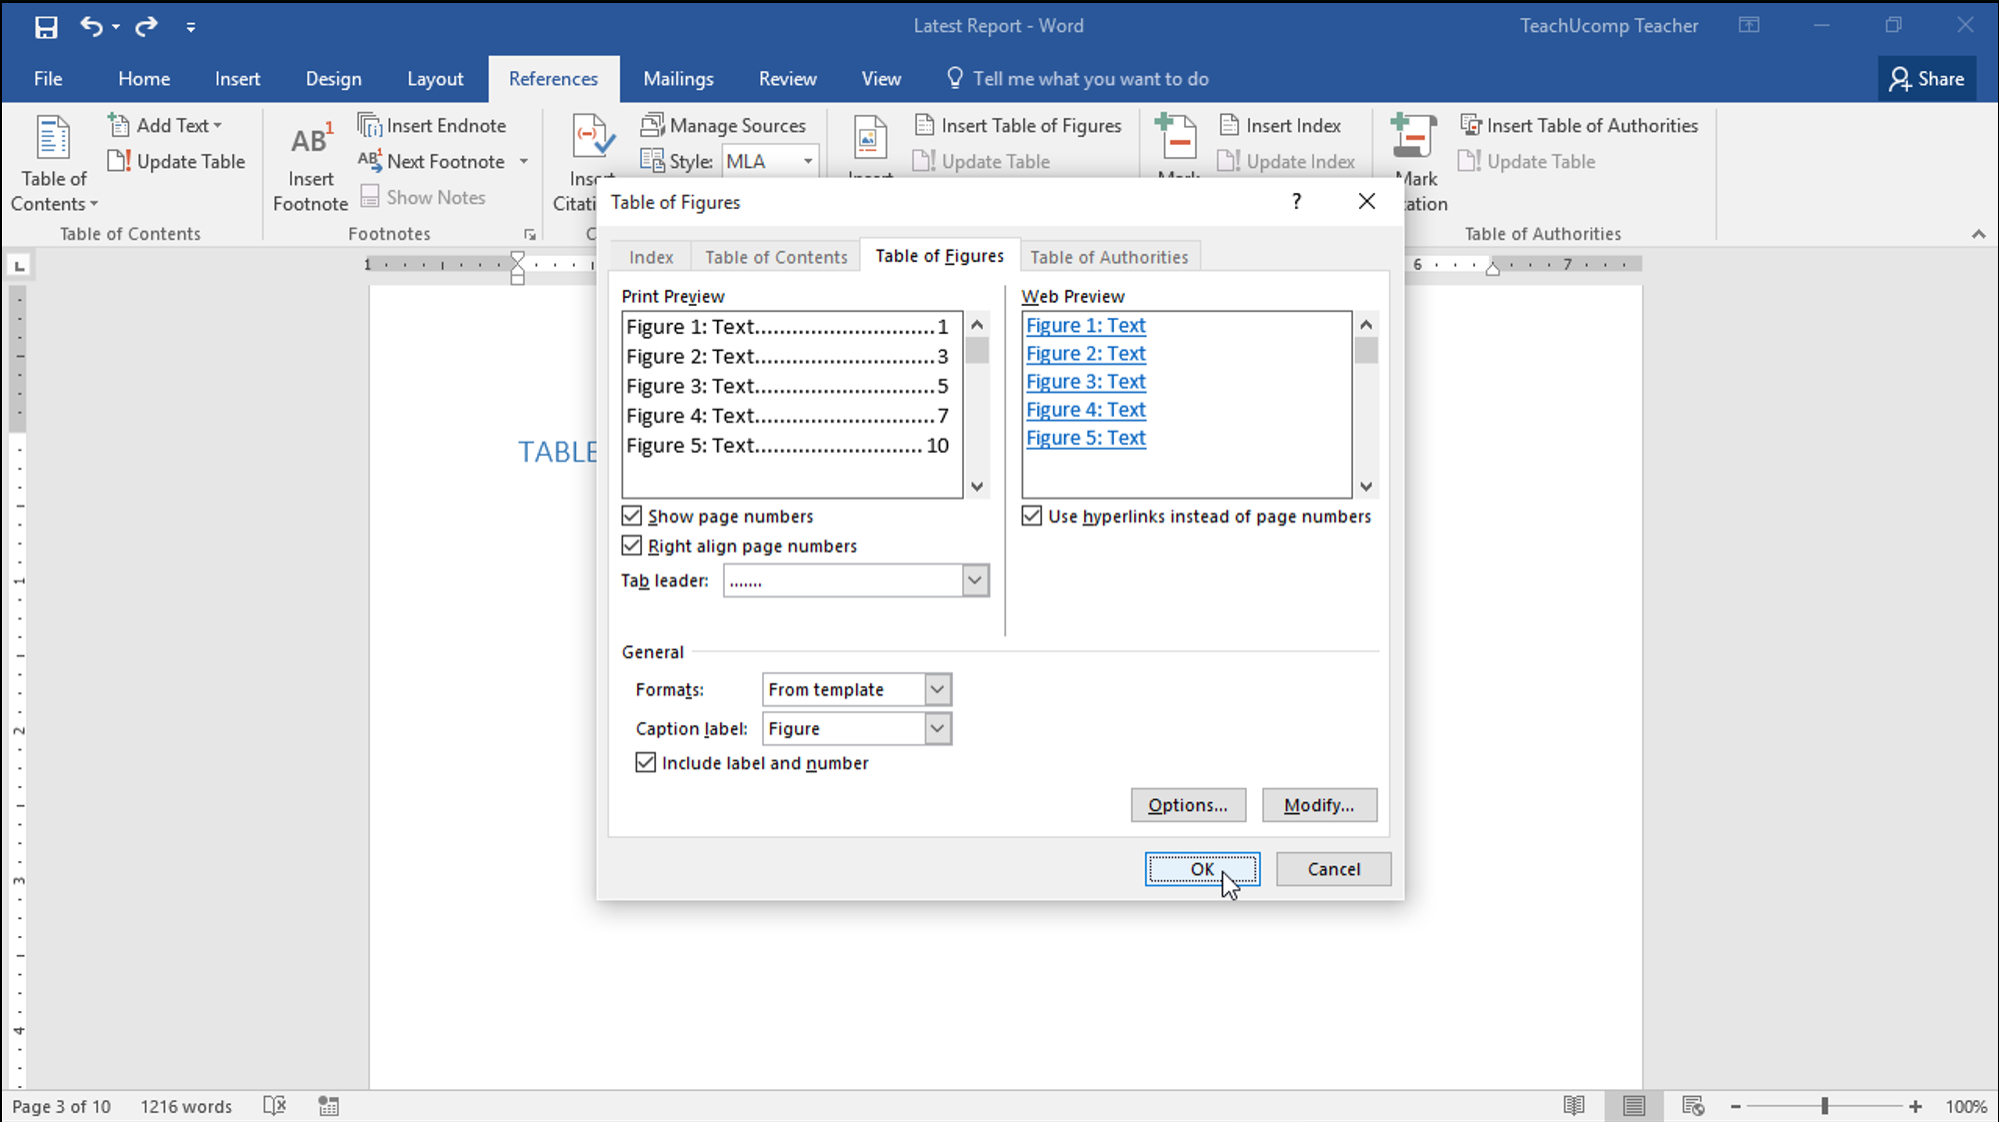 Insert A Table Of Figures In Word - Teachucomp, Inc. Inside Word 2013 Table Of Contents Template